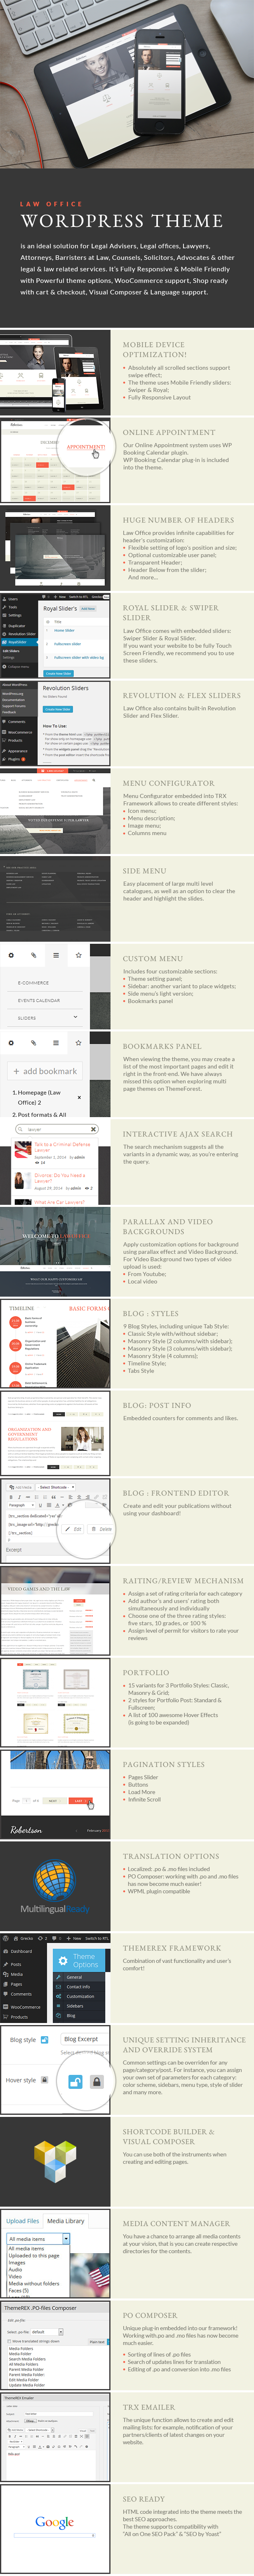 Law Office - Attorney & Legal Adviser WordPress Theme features